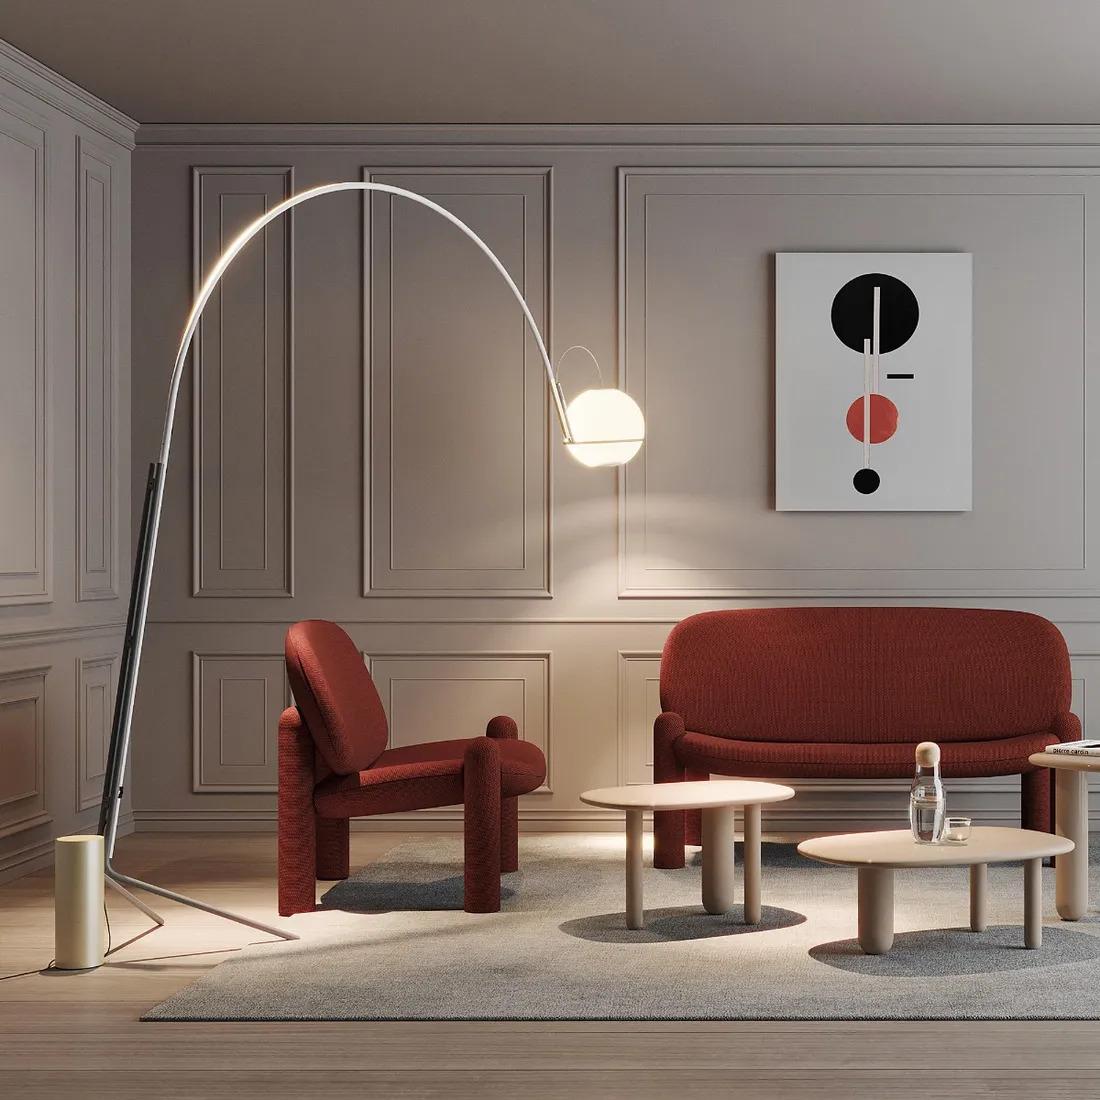 Francesco Librizzi 'Alicanto' Floor Lamp for Fontana Arte in White and Gold.

Executed in blown glass shade and white painted metal stem with golden accents, this floor lamp's elegant minimalism allows it to become a beautiful centerpiece in any